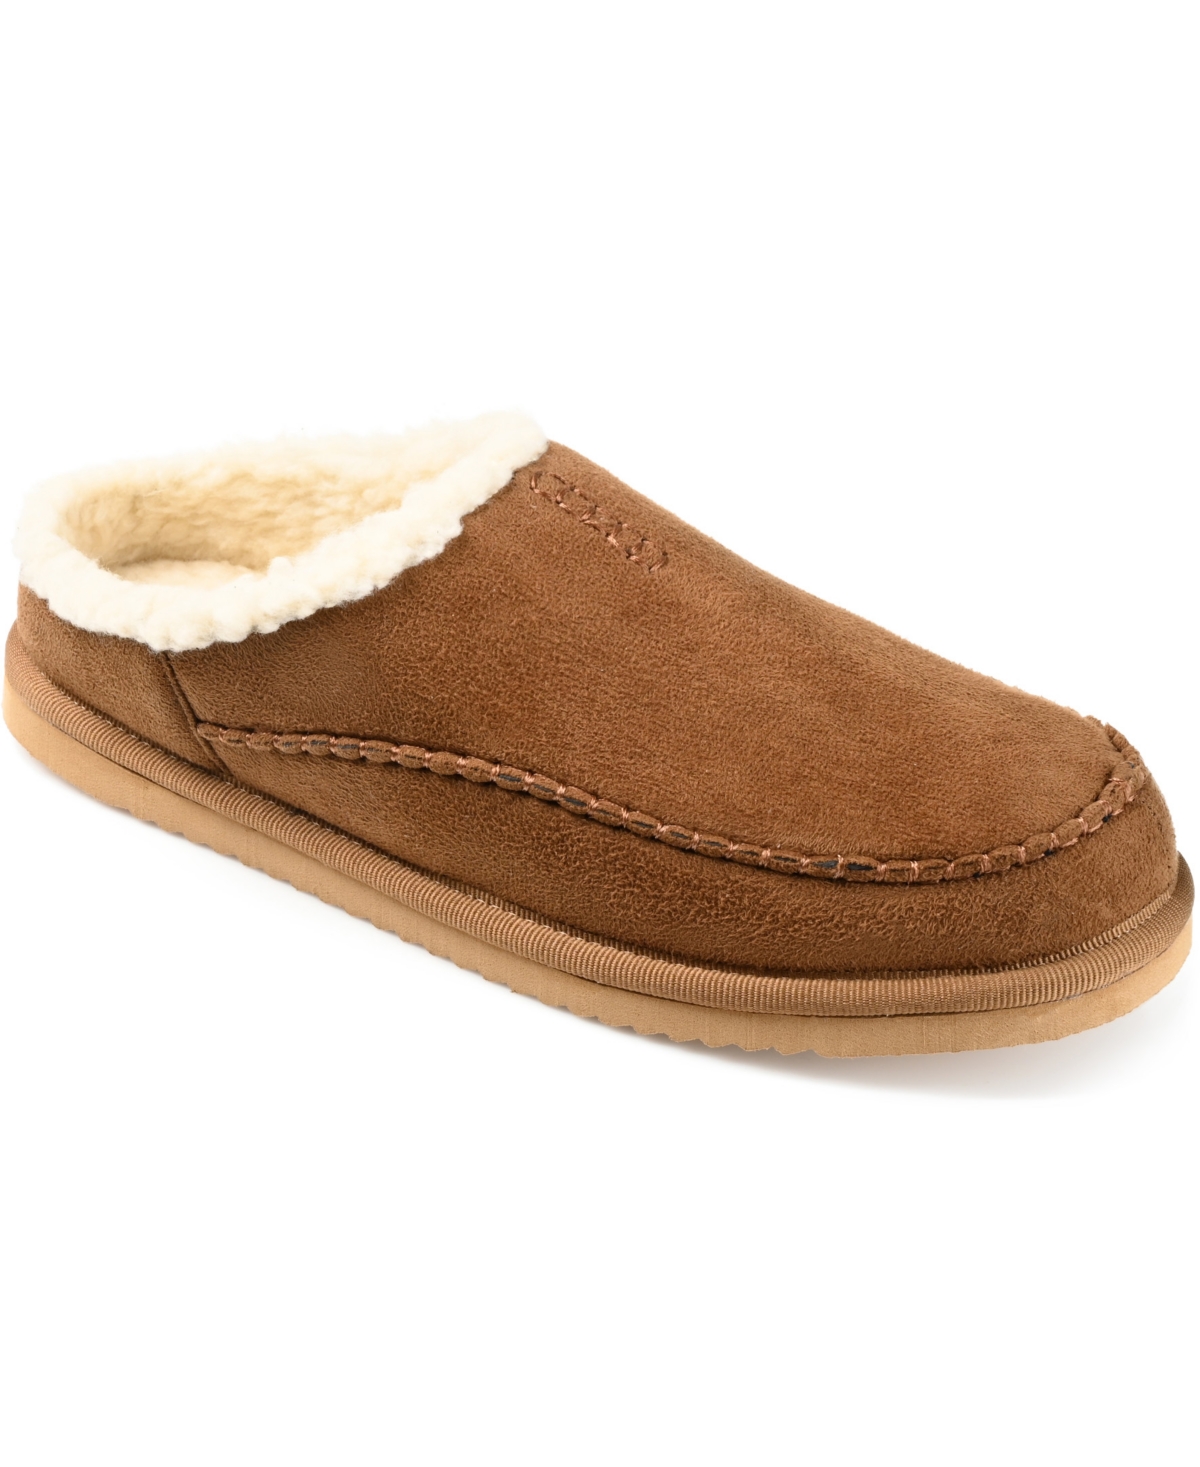 Men's Lavell Moccasin Clog Slippers - Tan